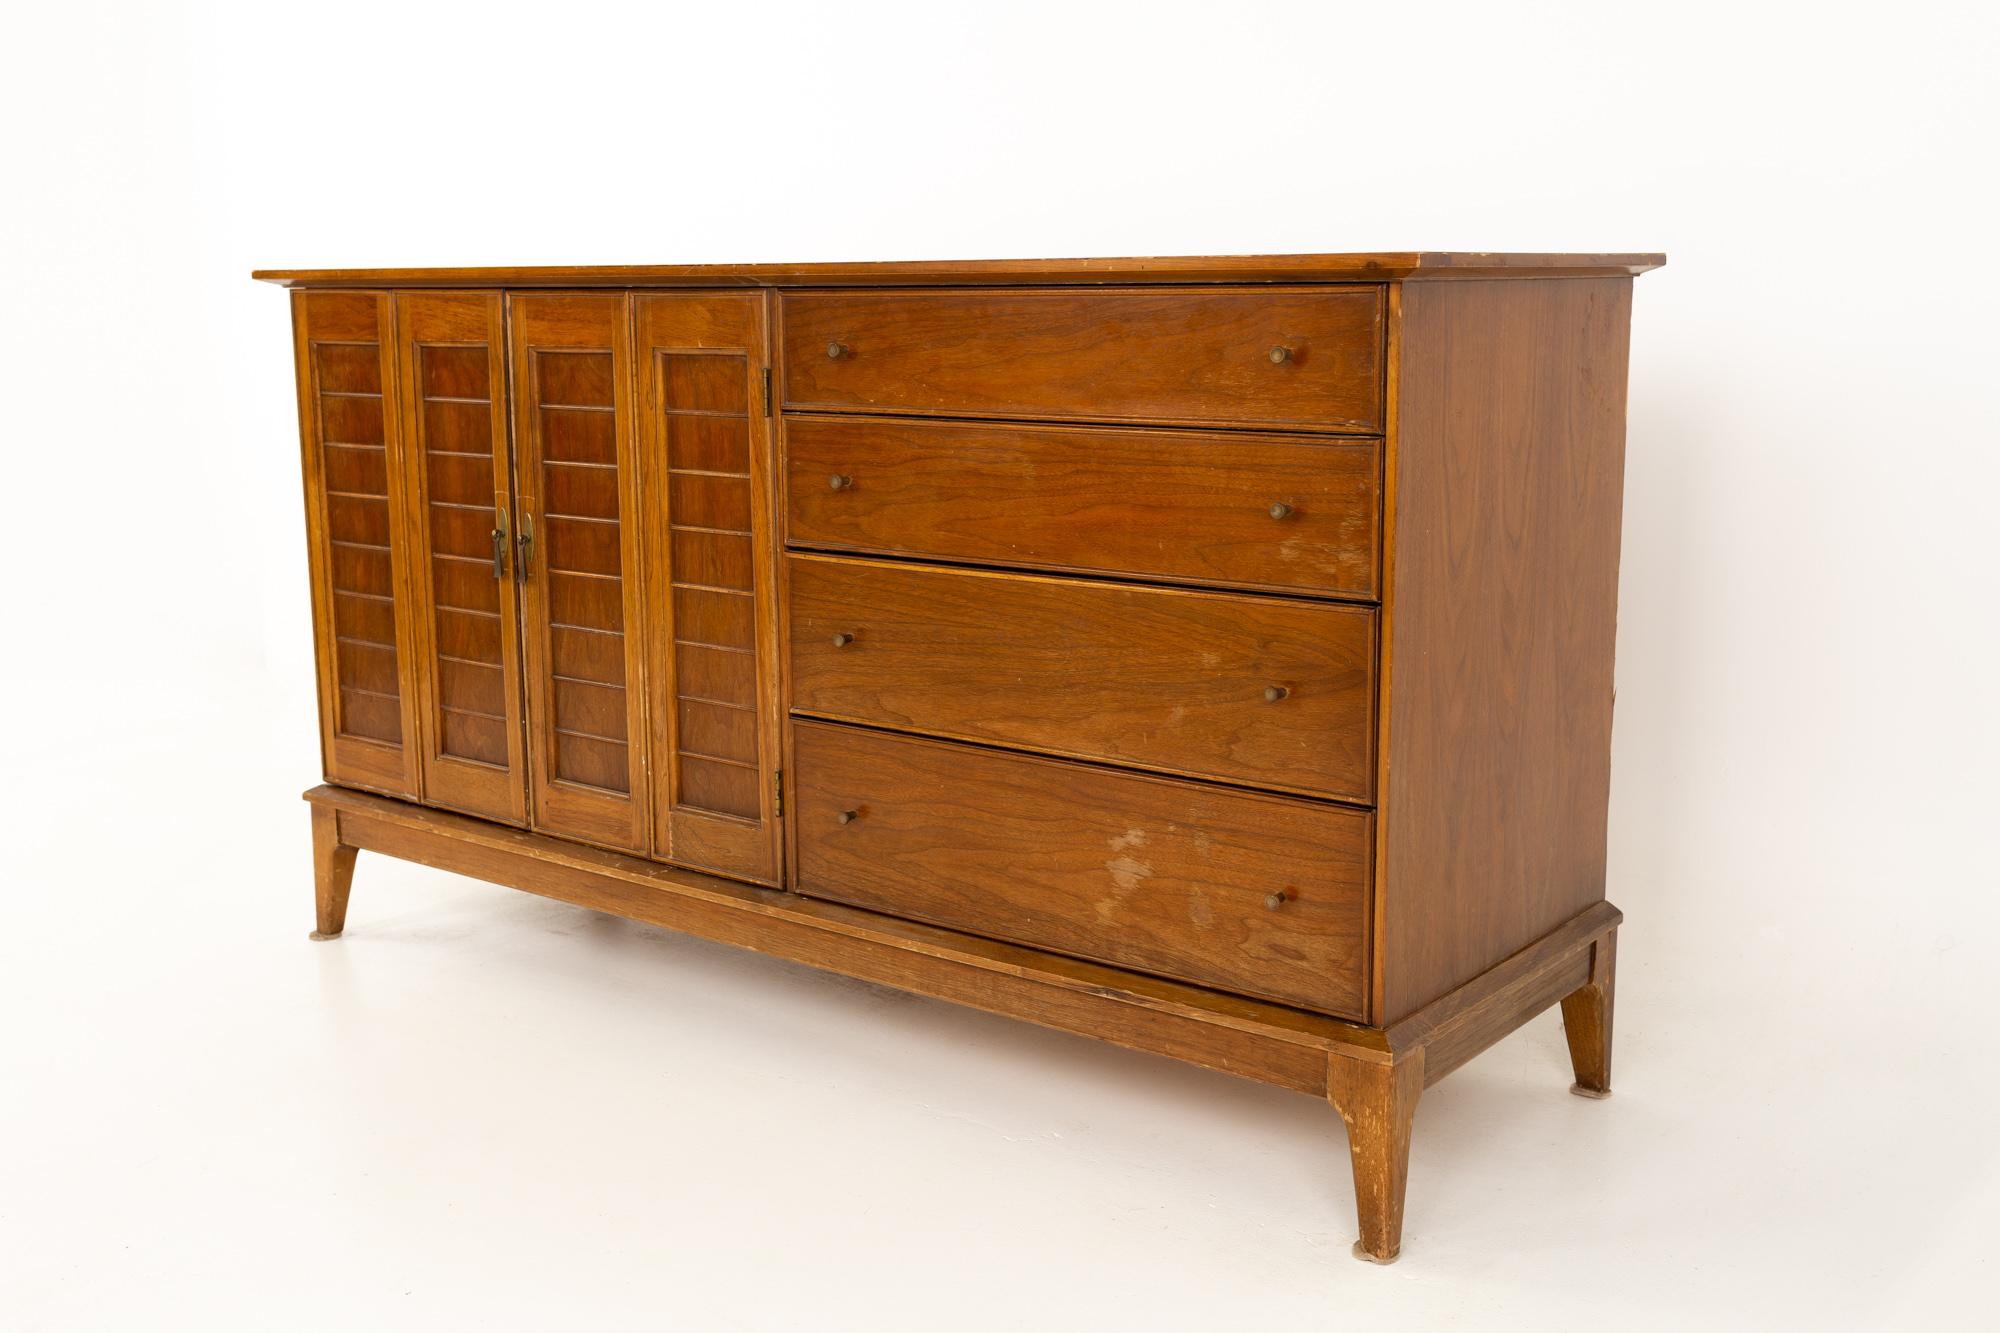 Mid century walnut sideboard buffet credenza
This buffet is 58 wide x 19 deep x 31.75 inches high

All pieces of furniture can be had in what we call restored vintage condition. That means the piece is restored upon purchase so it’s free of